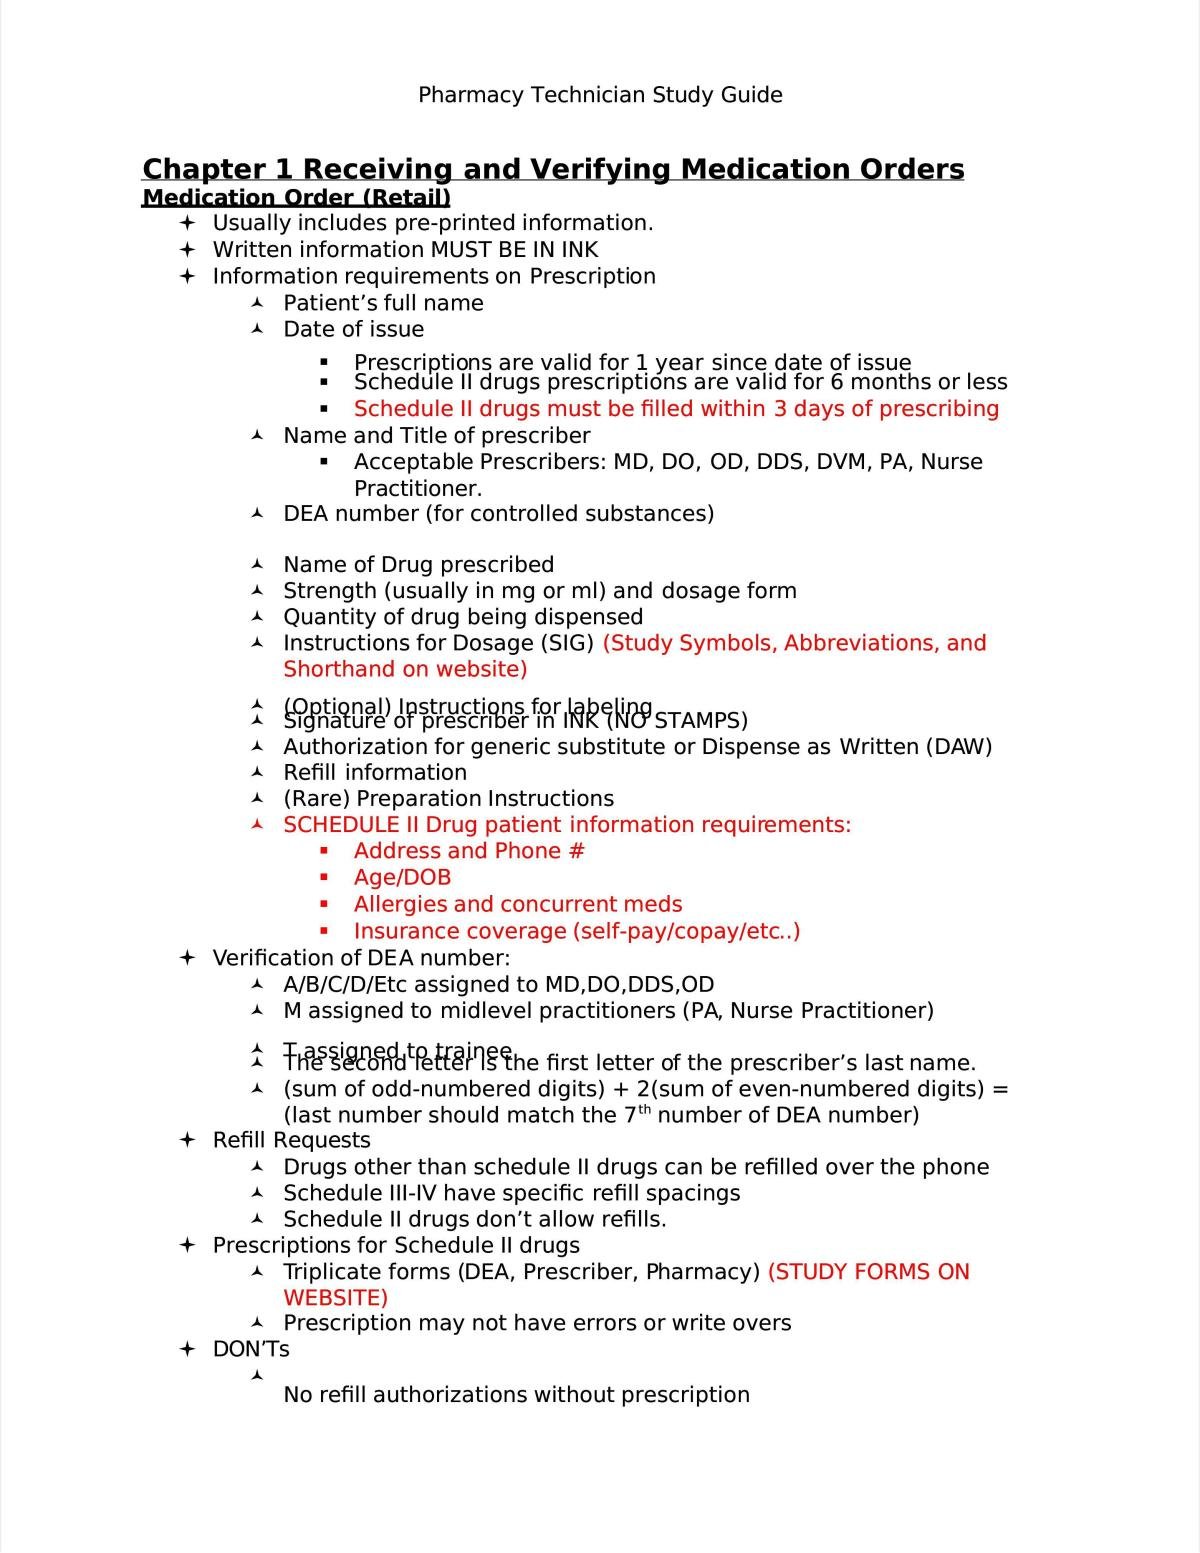 Pharmacy Technician Study Notes - Page 1